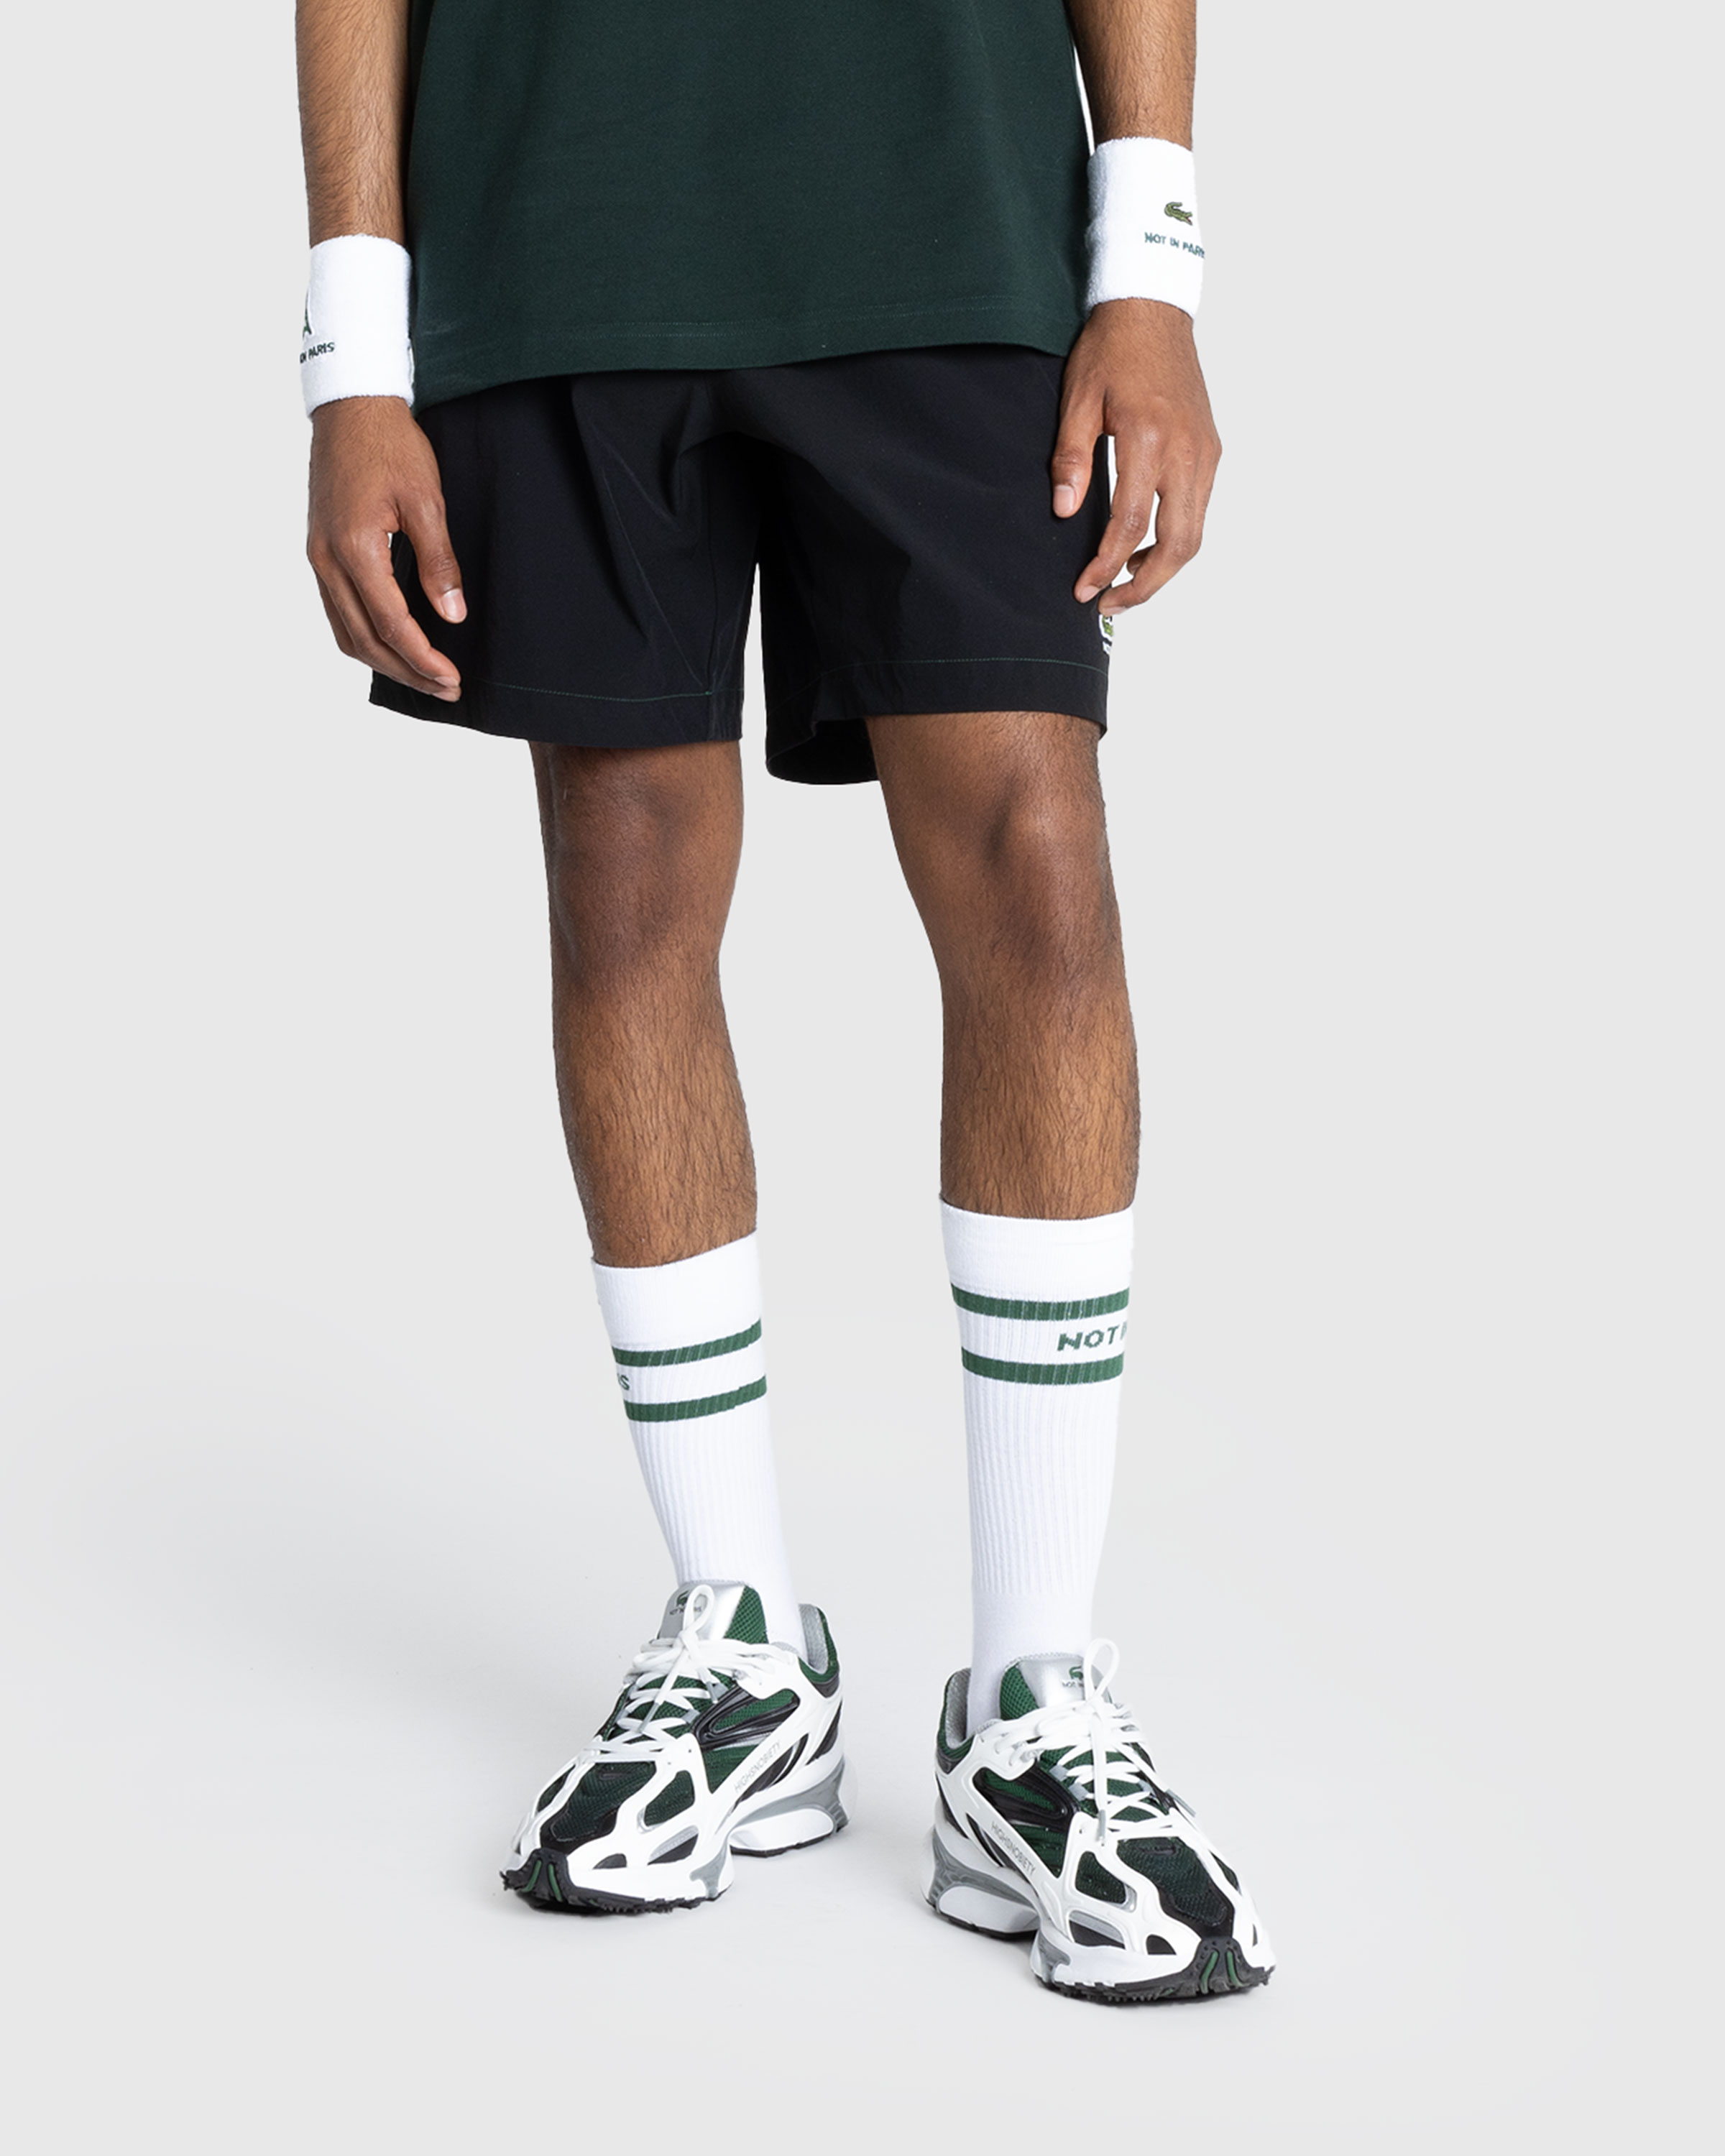 Lacoste x Highsnobiety – Not In Paris Tennis Shorts Black - Active Shorts - Sinople - Image 2